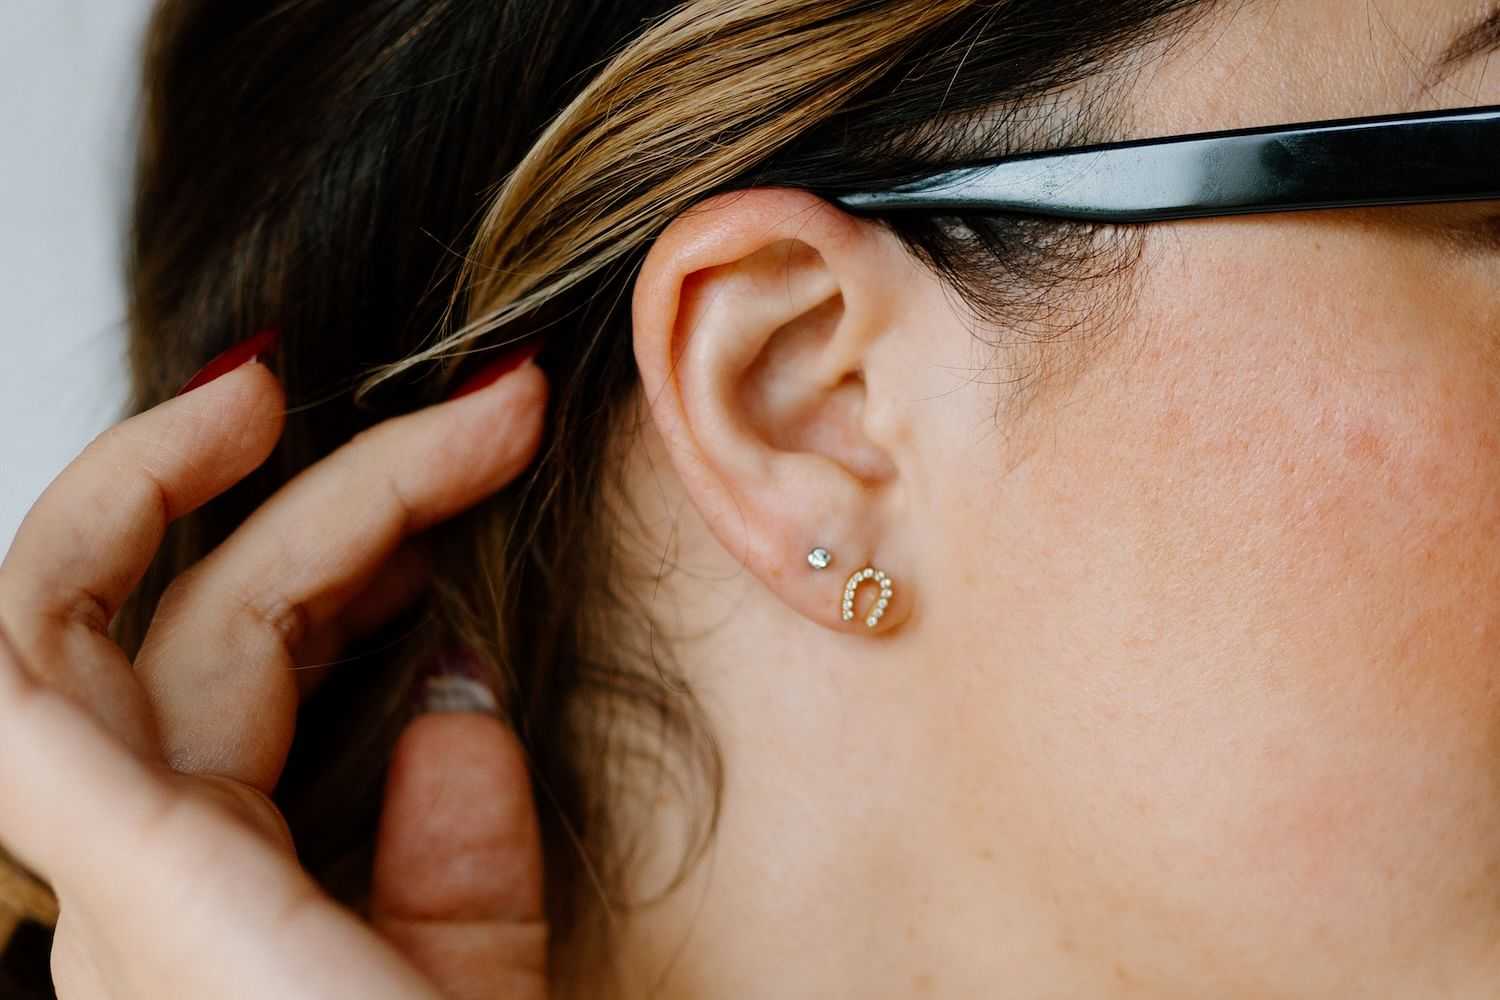 Woman wearing black glasses and a horseshoe-shaped earring touches the side of her head.